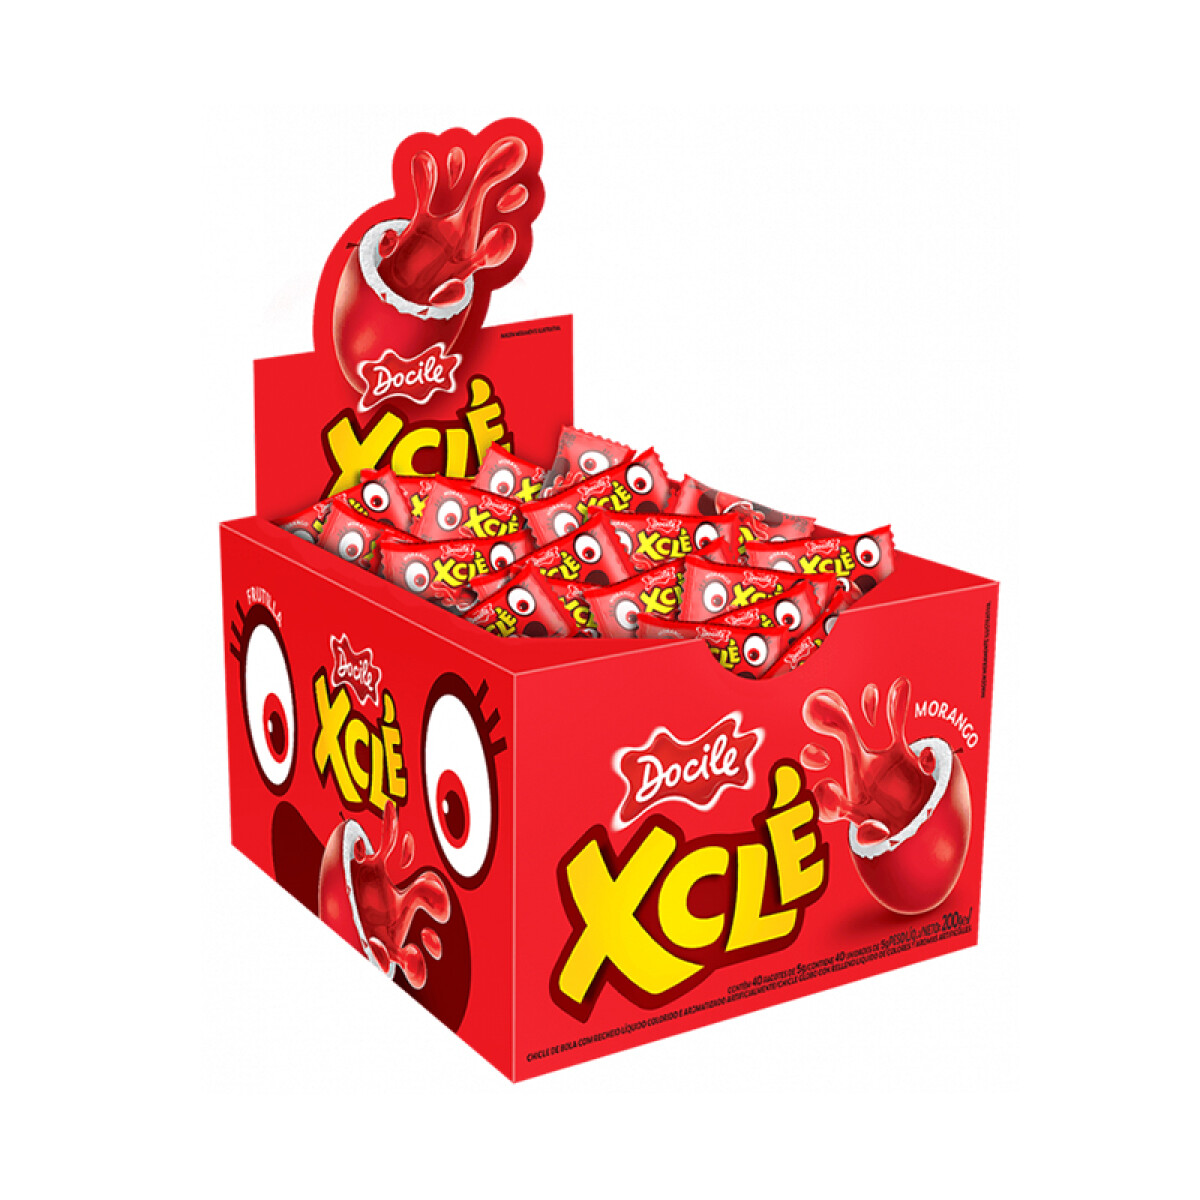 Chicle DOCILE XCLE x40 unidades 200grs - Frutilla 